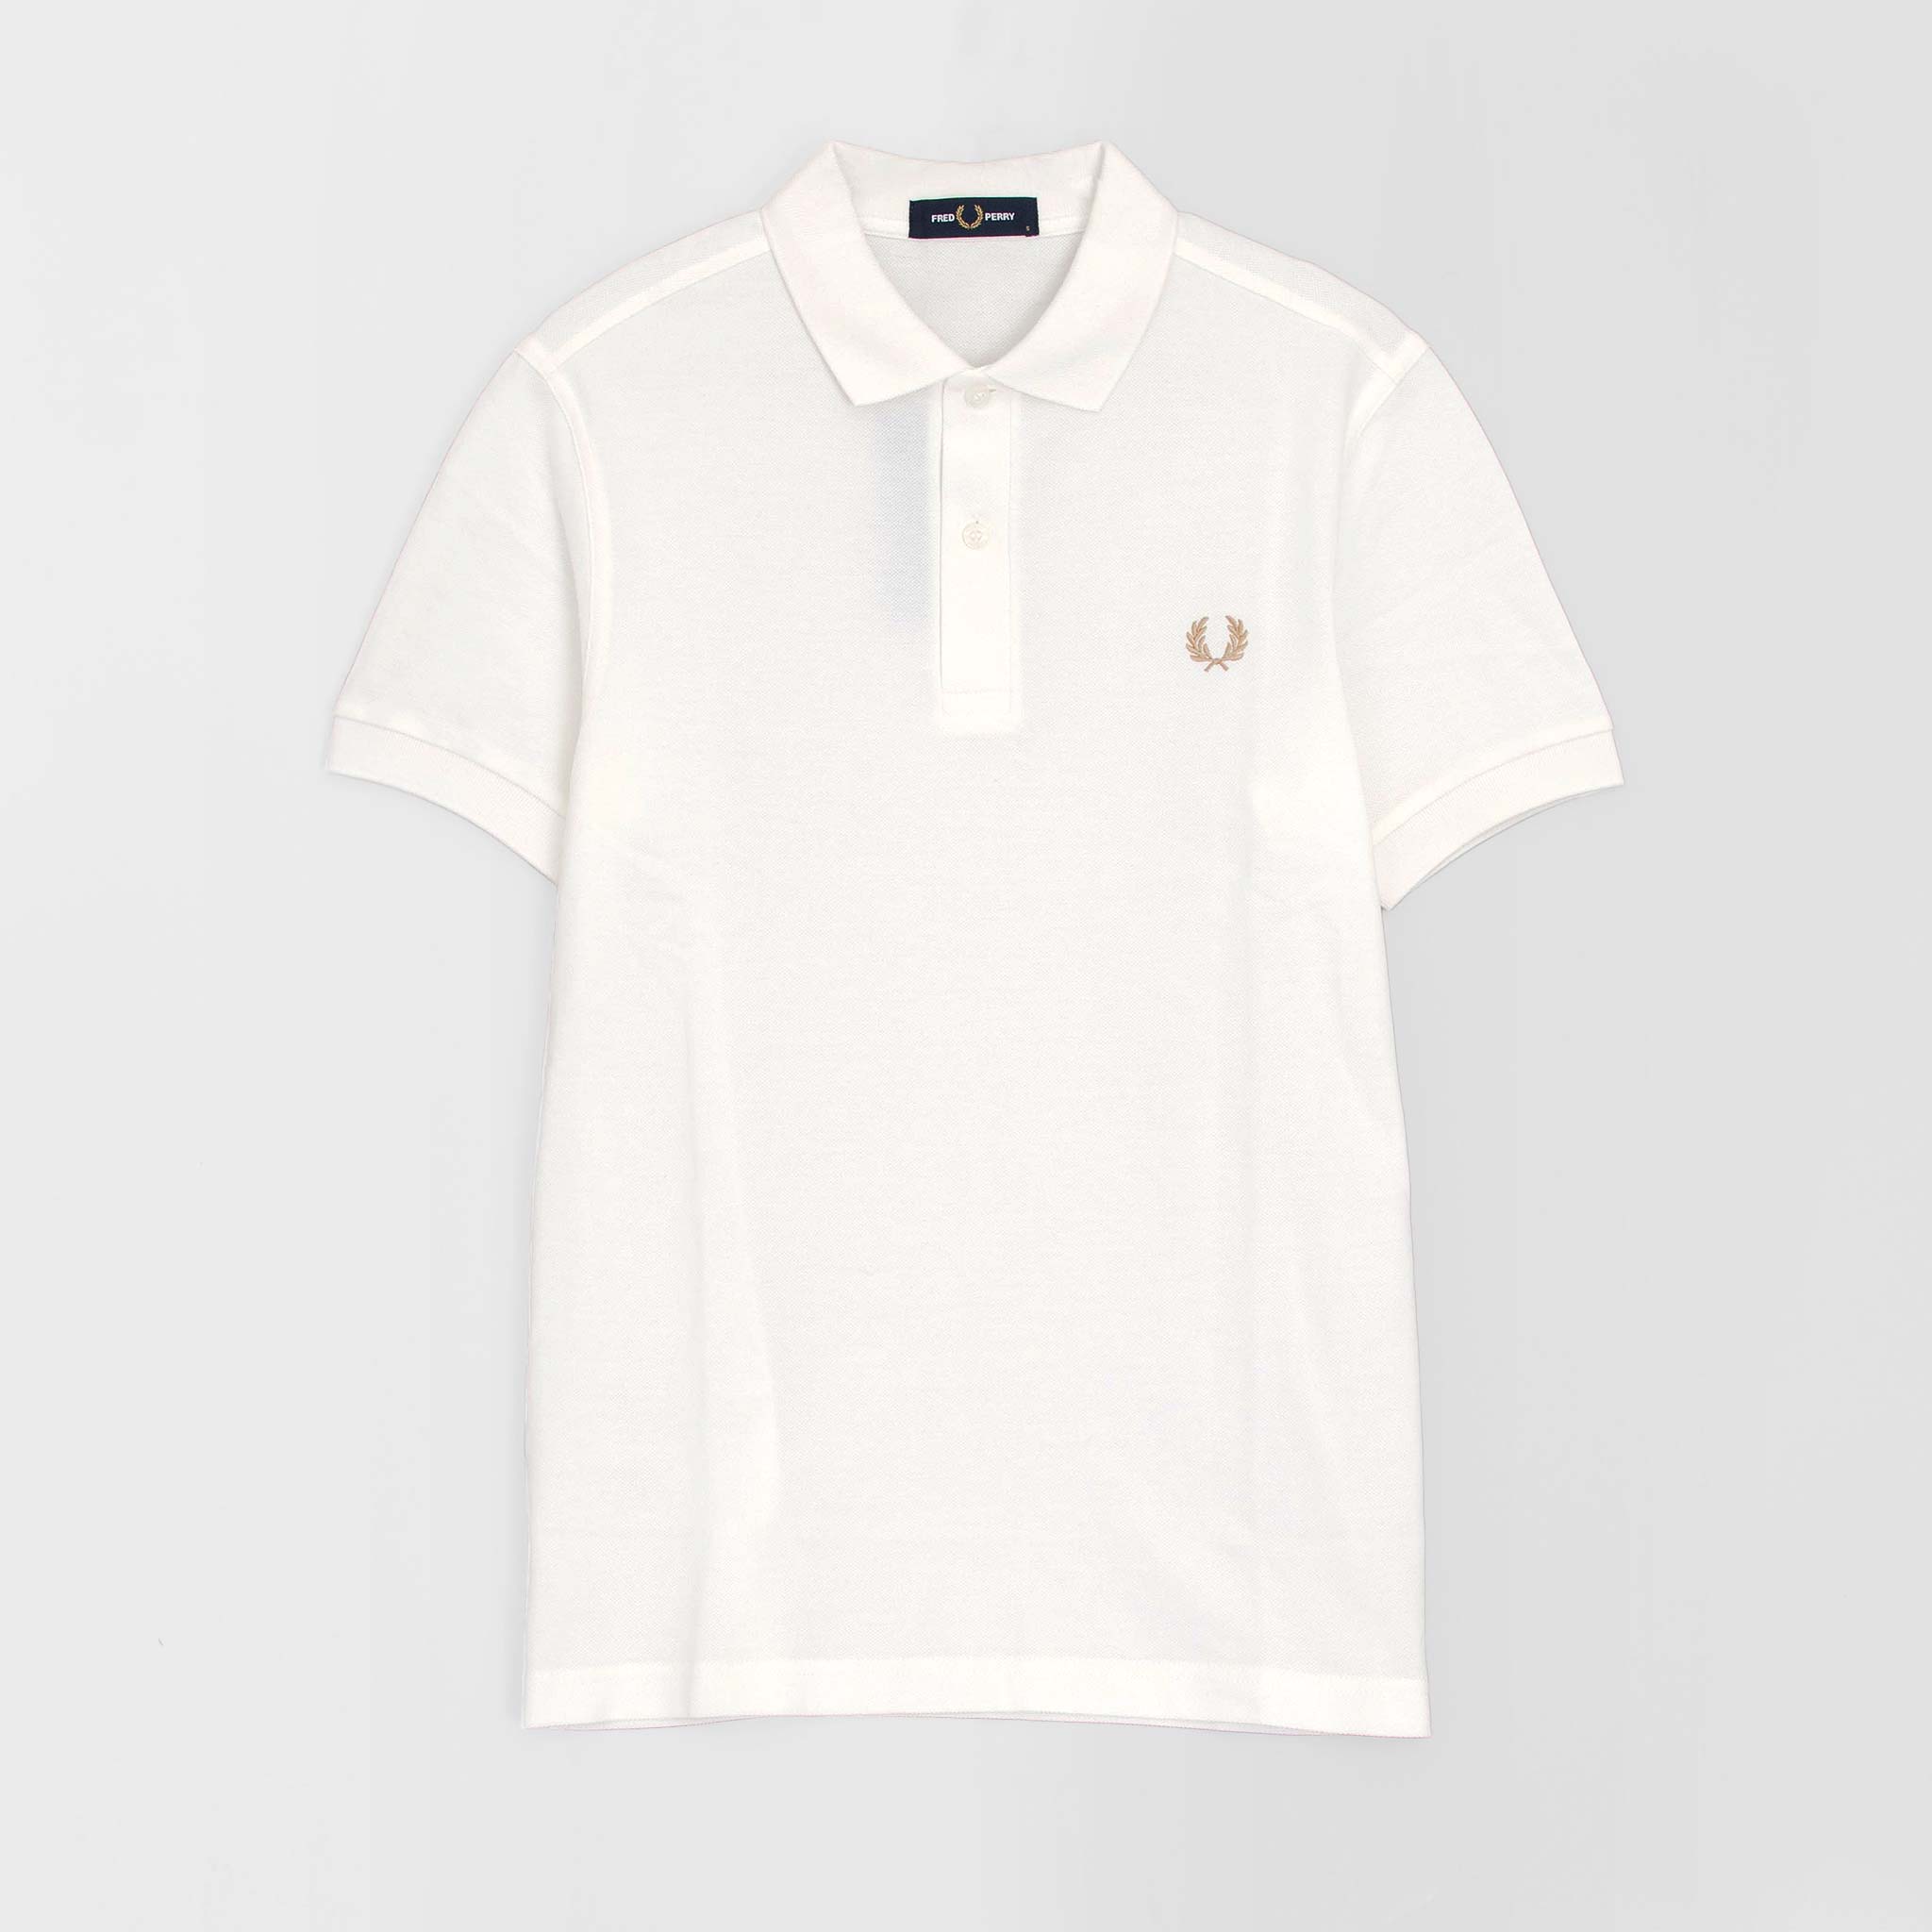 FRED PERRY THE FRED PERRY SHIRT M6000